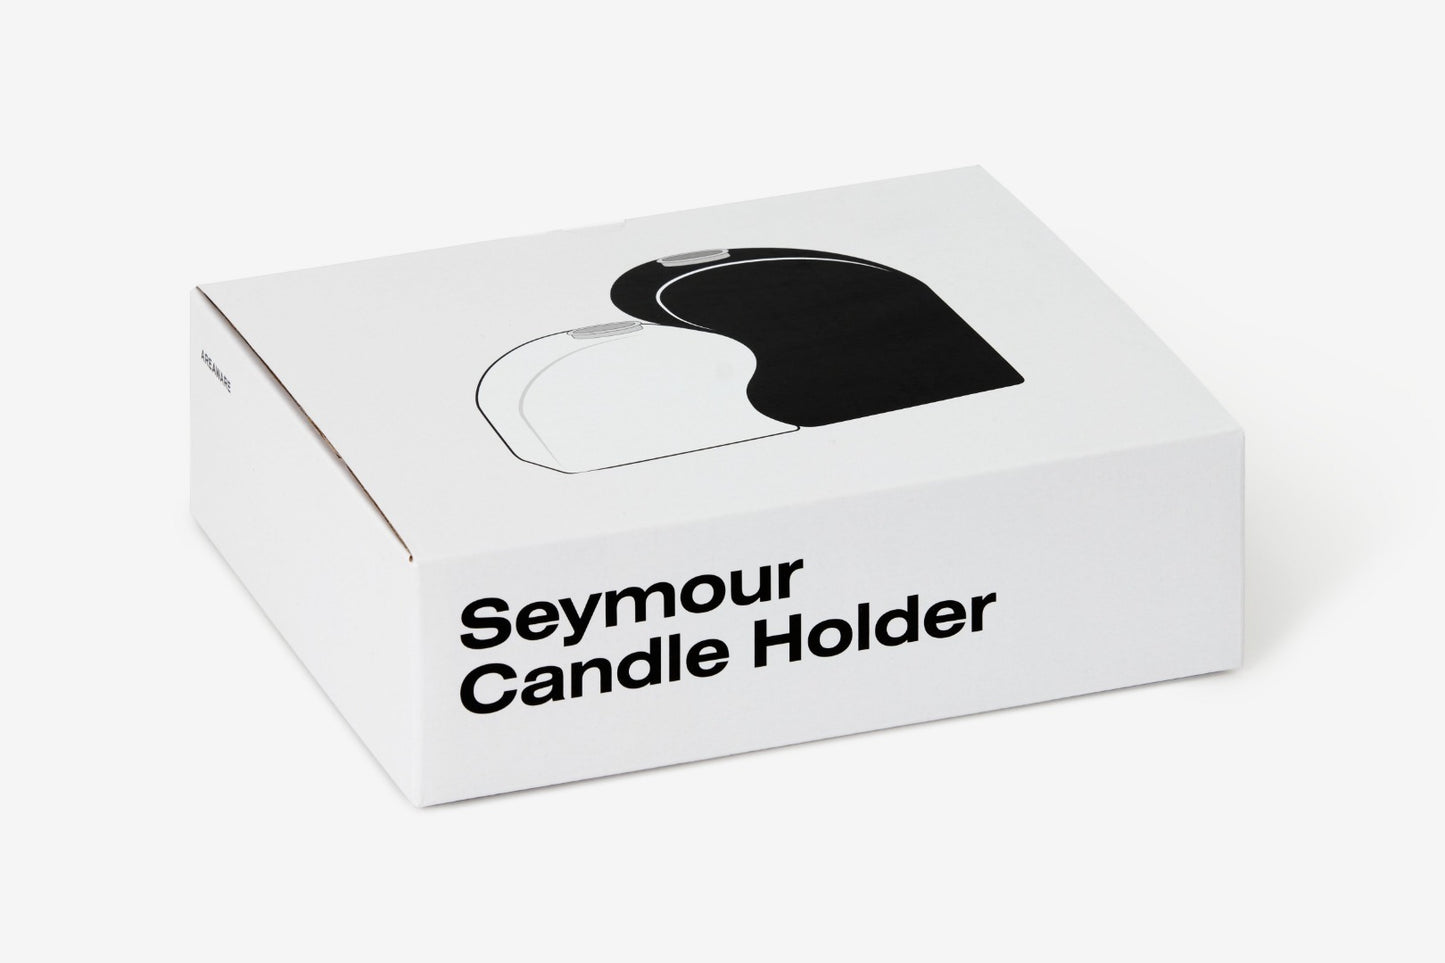 box for candle holders, with illustrated image of curved black and white candle holders which fit together and text reading 'Seymour Candle Holder'